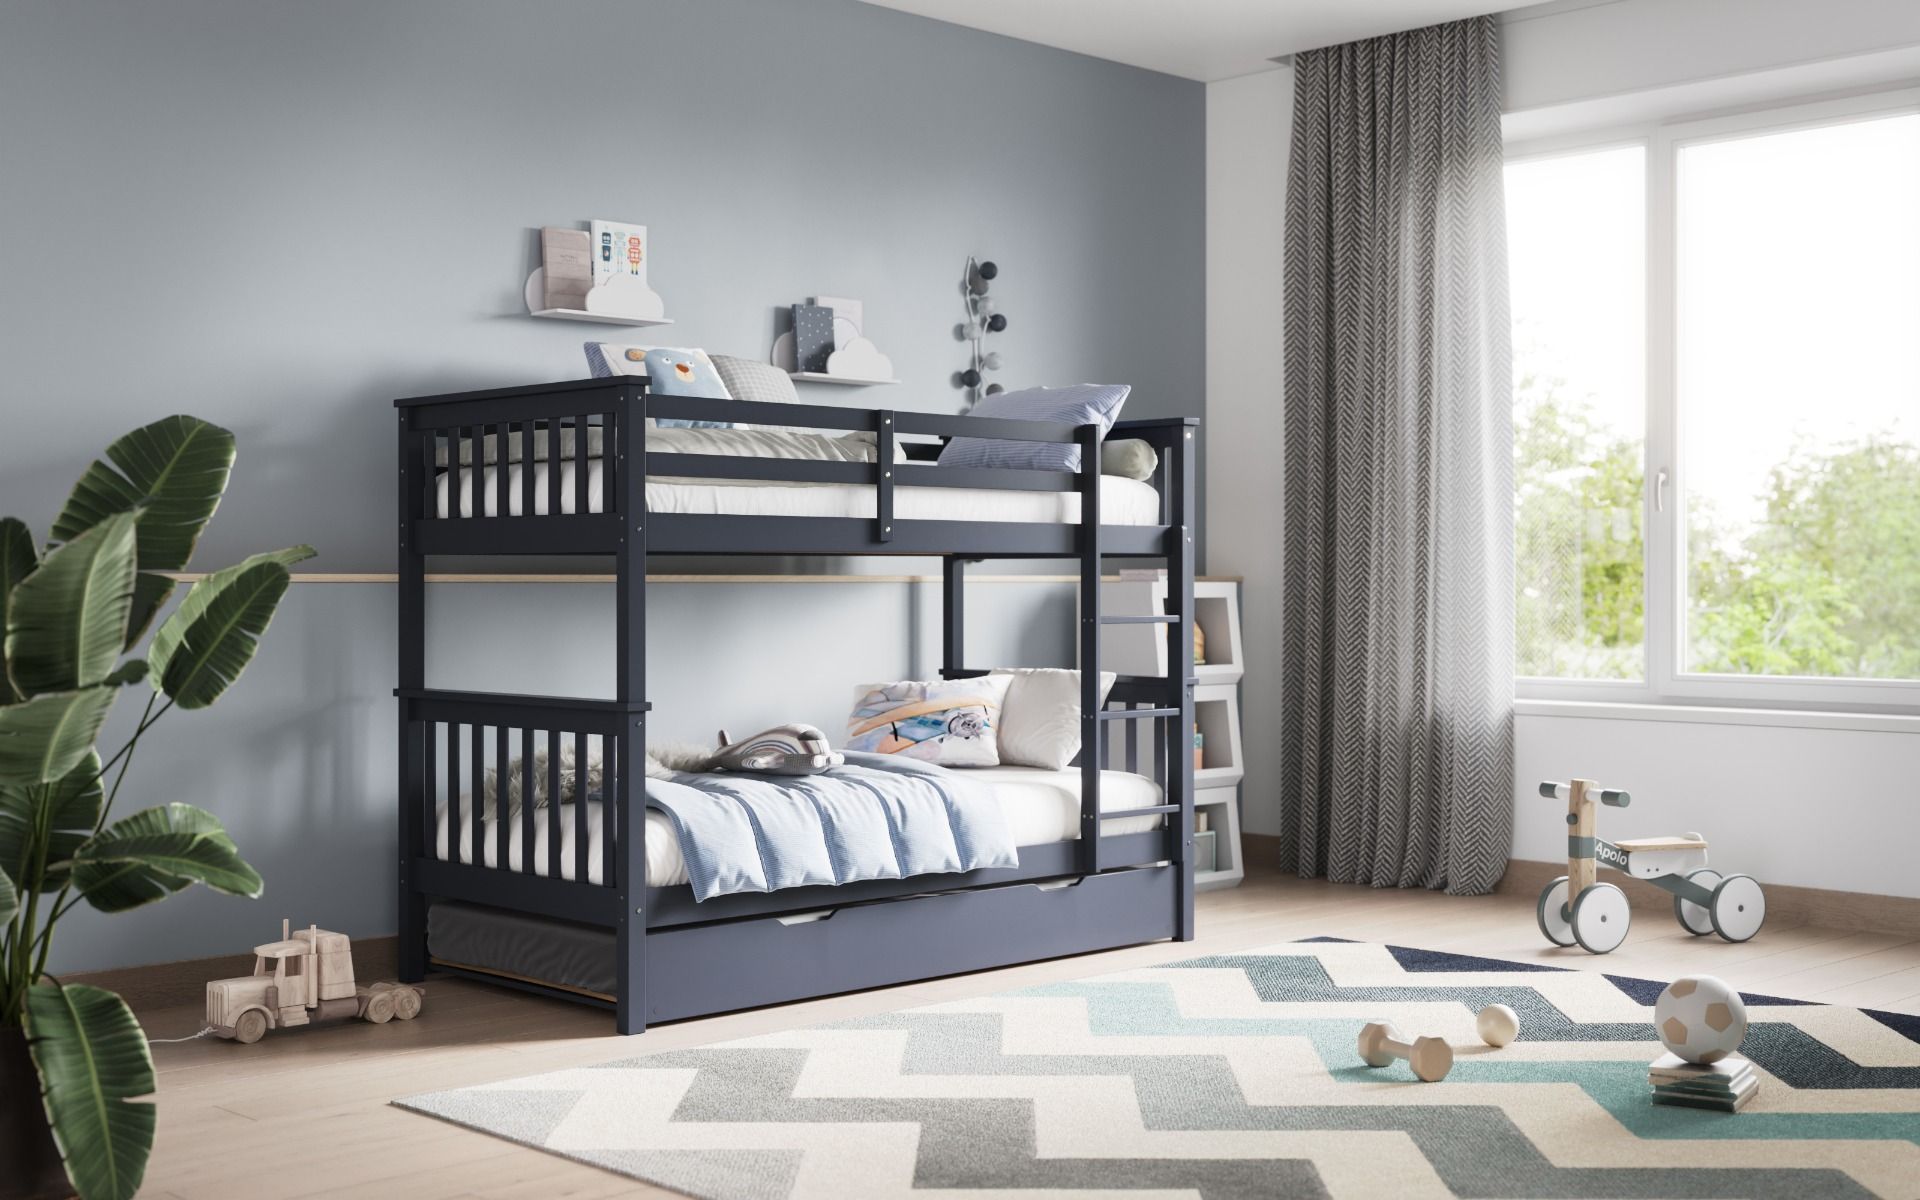 Flair Zoom Detachable Bunk Bed with Trundle - Grey